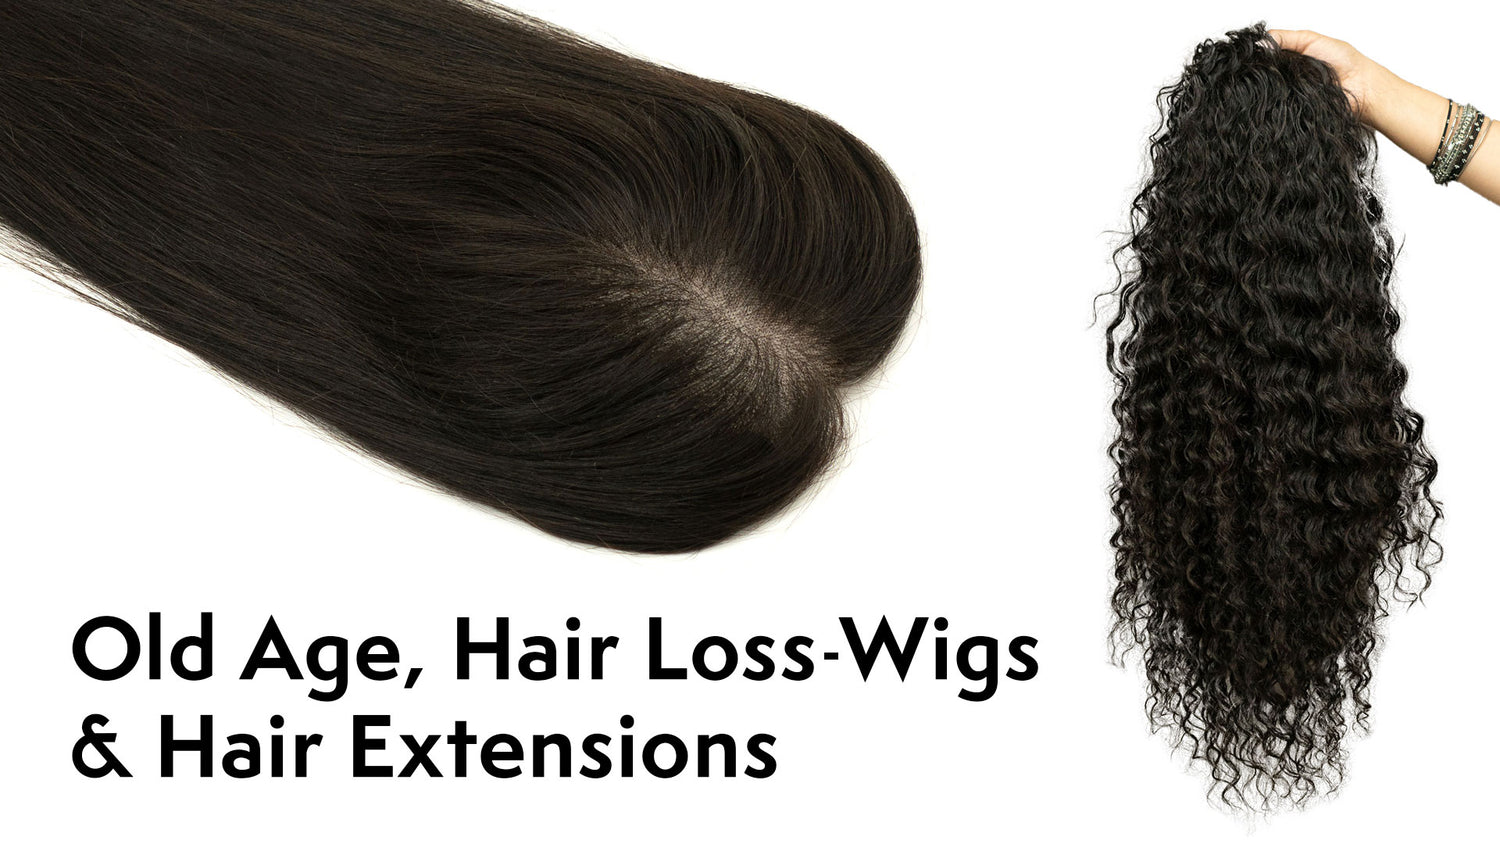 Old Age, Hair Loss - Wigs & Hair Extensions